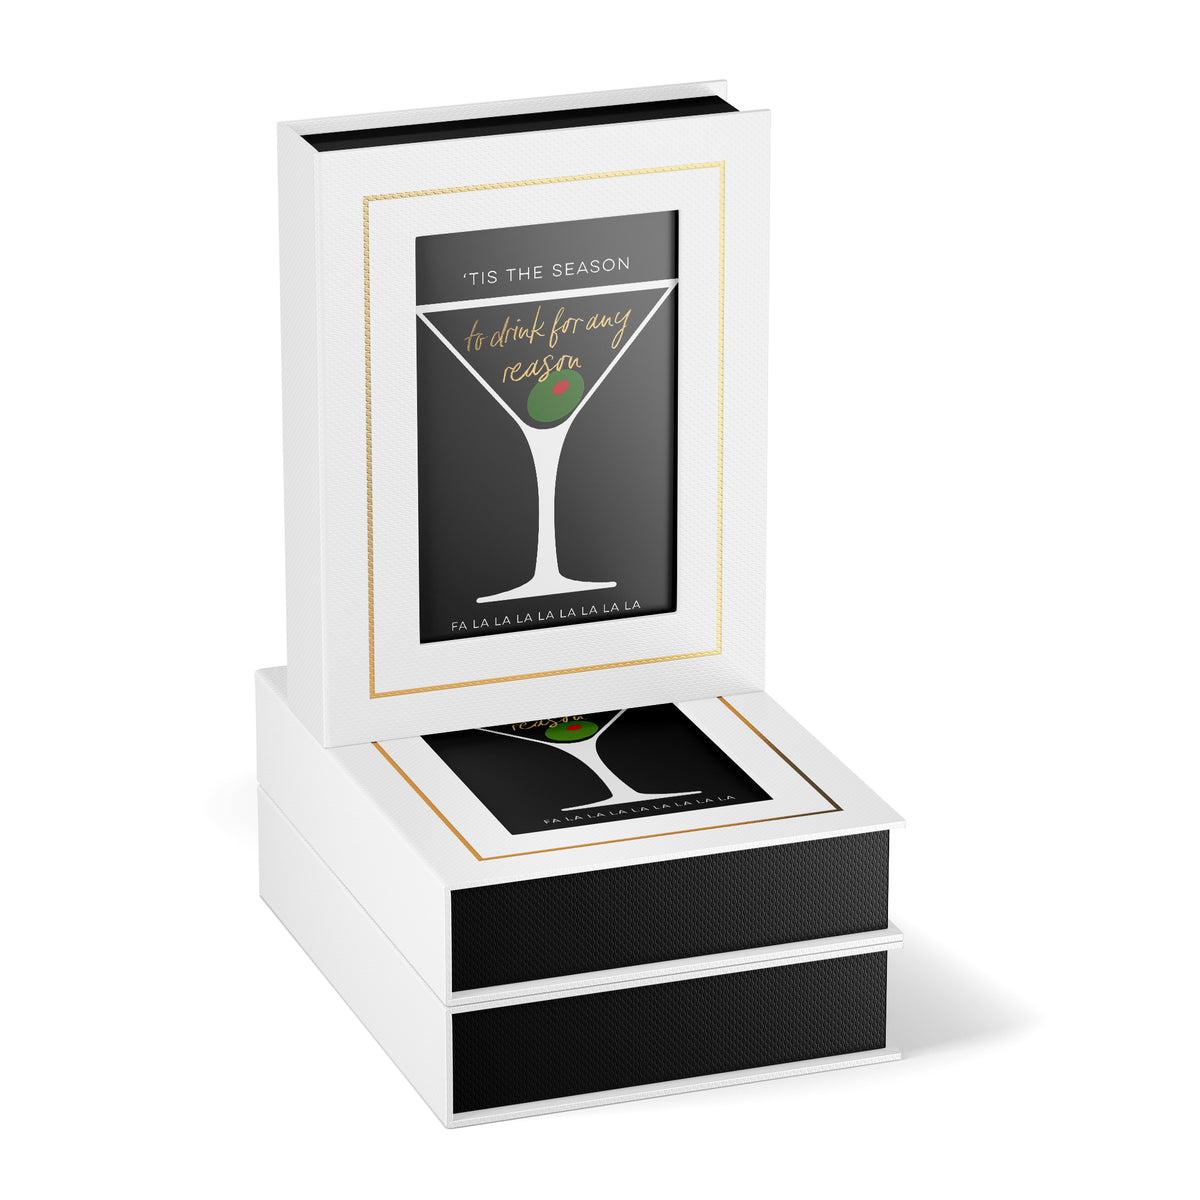 Drinking Season Boxed Holiday Cards by Fine Moments